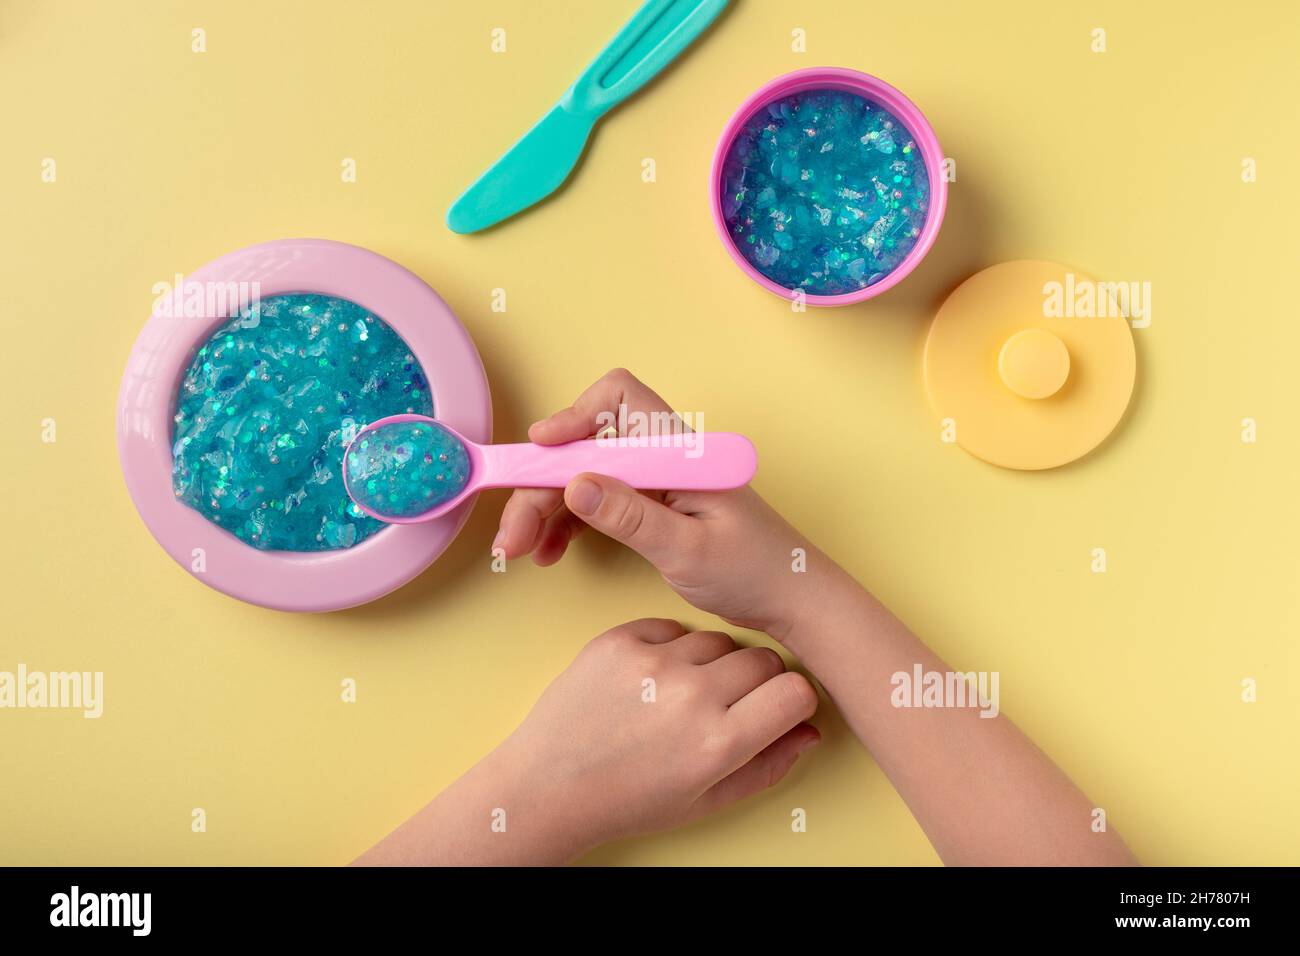 https://c8.alamy.com/comp/2H7807H/girl-playing-with-toy-kitchen-utensils-and-blue-glitter-slime-2H7807H.jpg